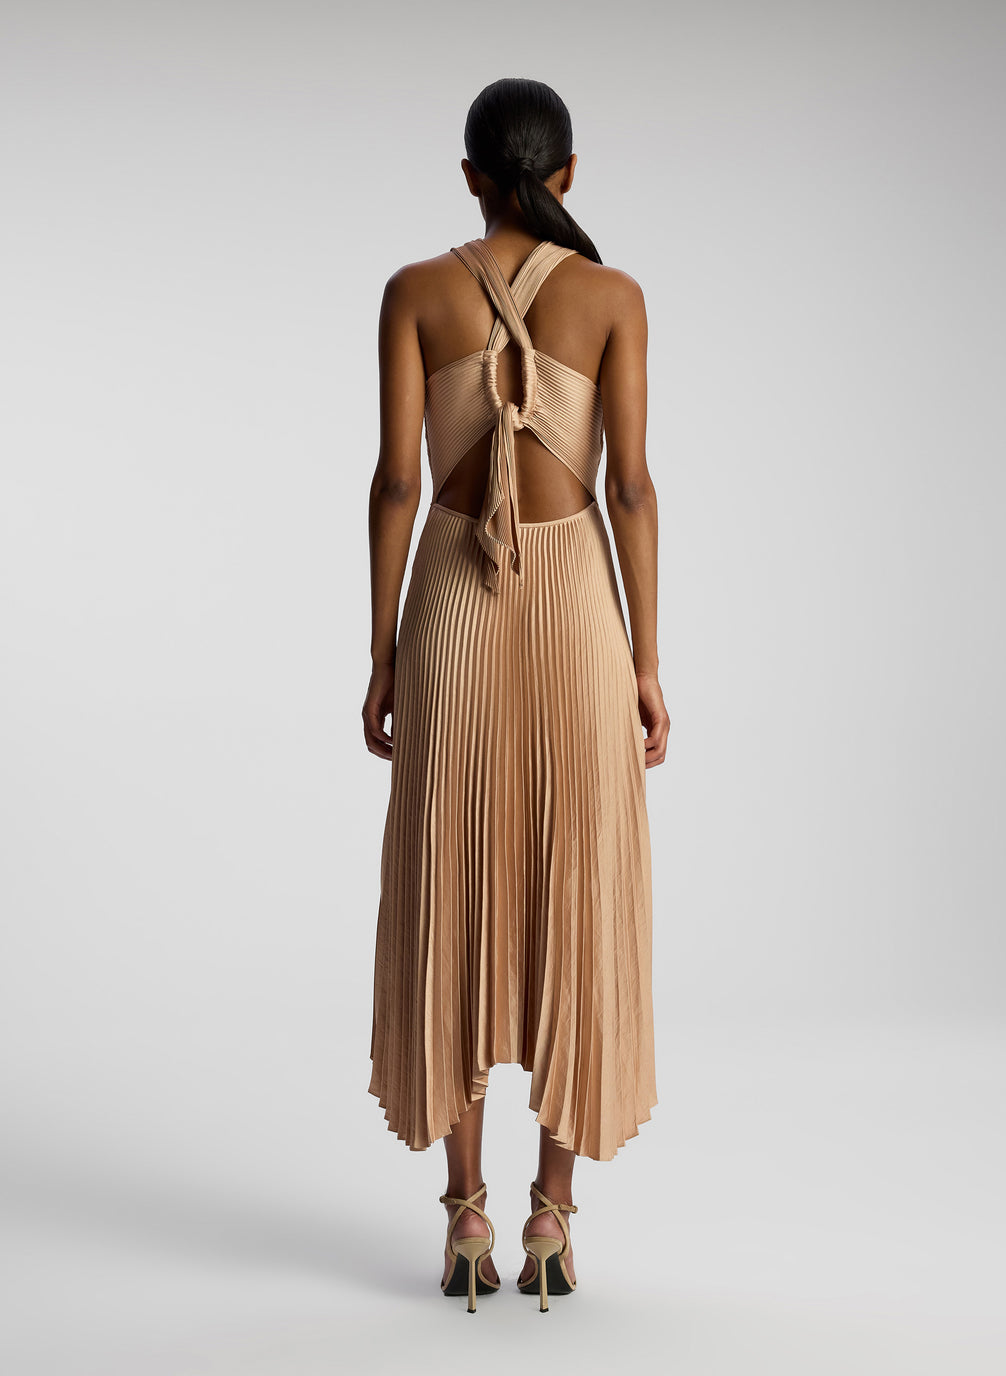 back view of woman wearing blush colored pleated midi dress